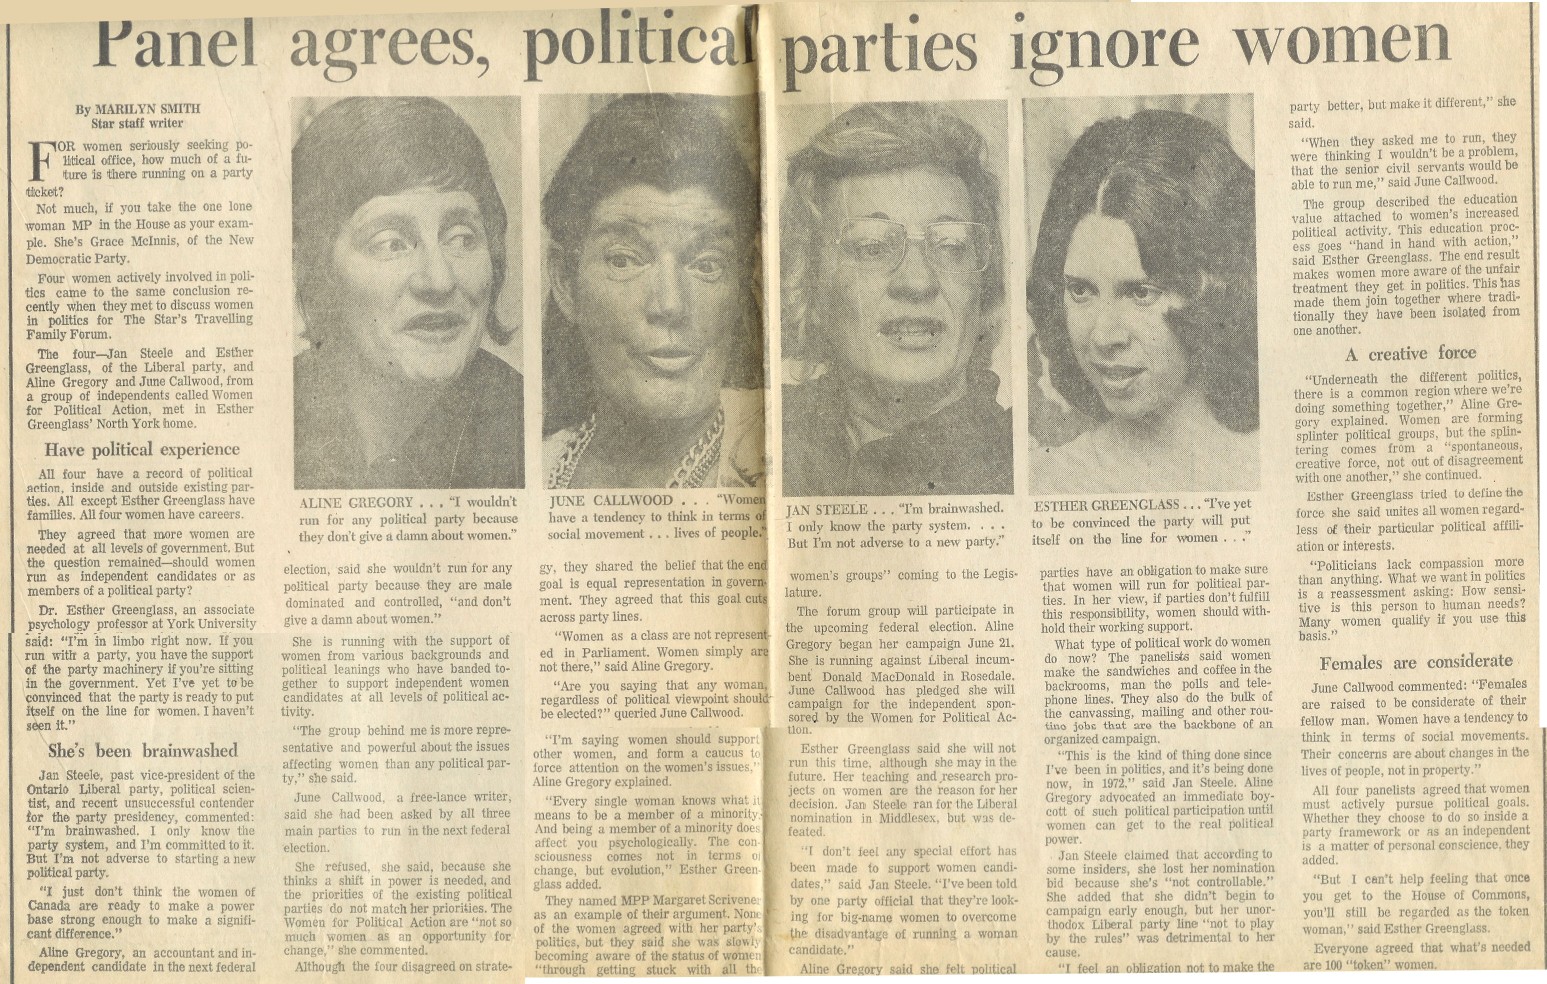 Panel agrees, political parties ignore women - Toronto Star, June 24, 1972